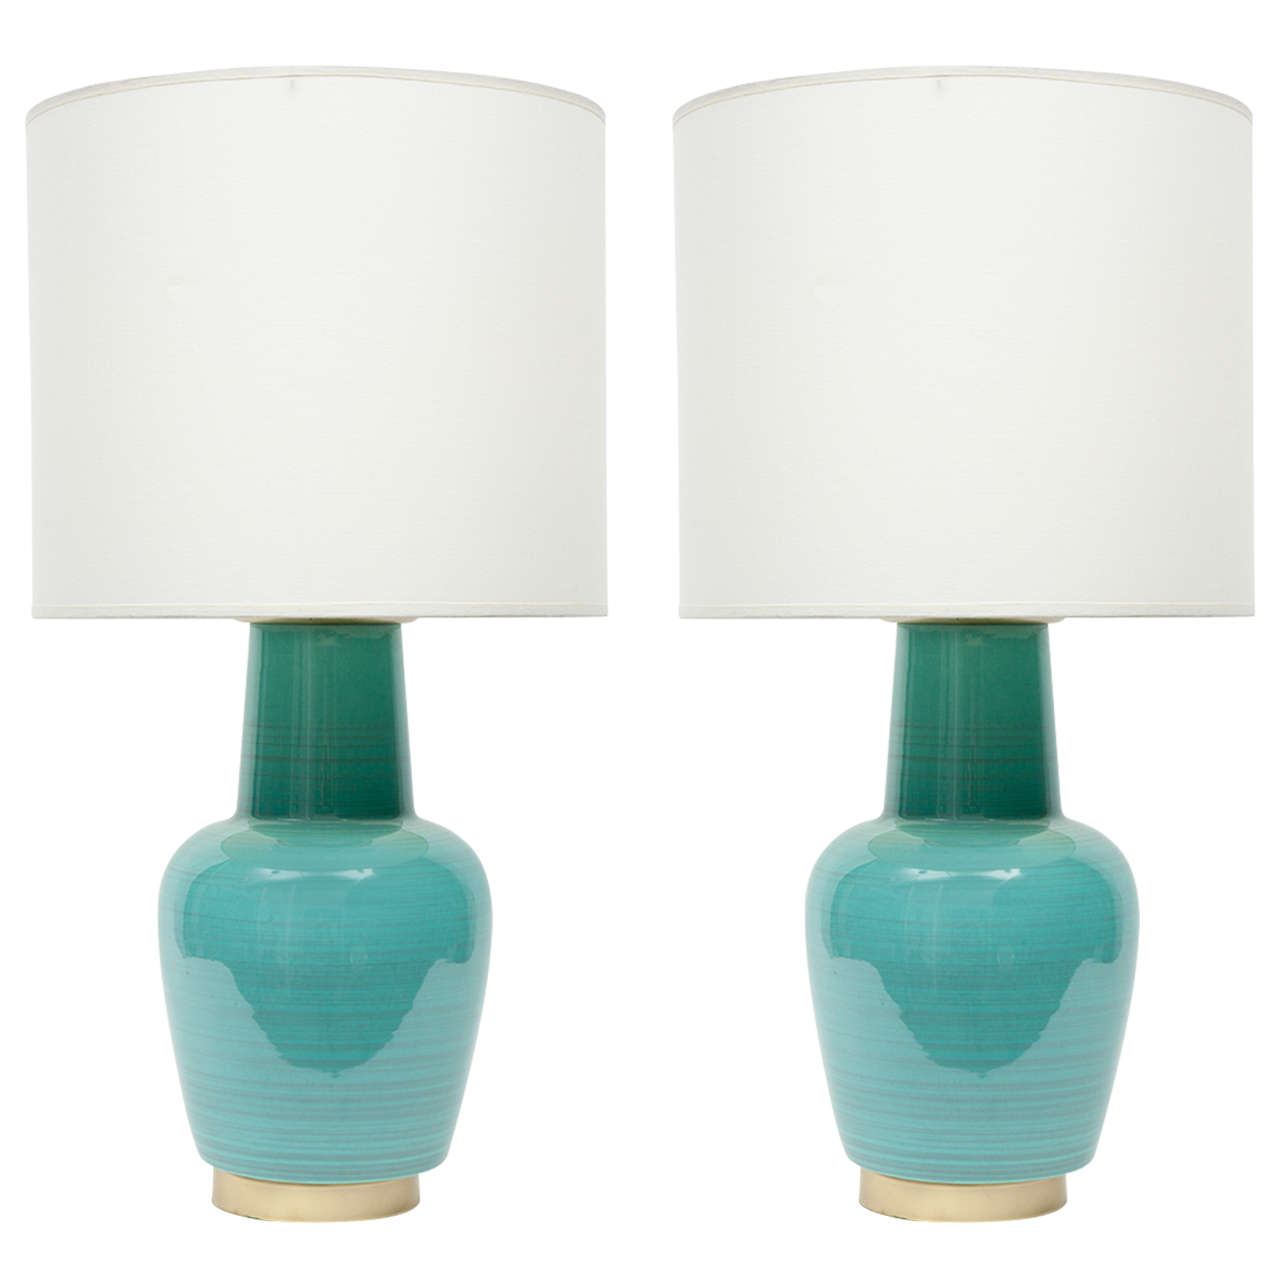 Pair of Turquoise Glazed Ceramic Lamps by Stiffel